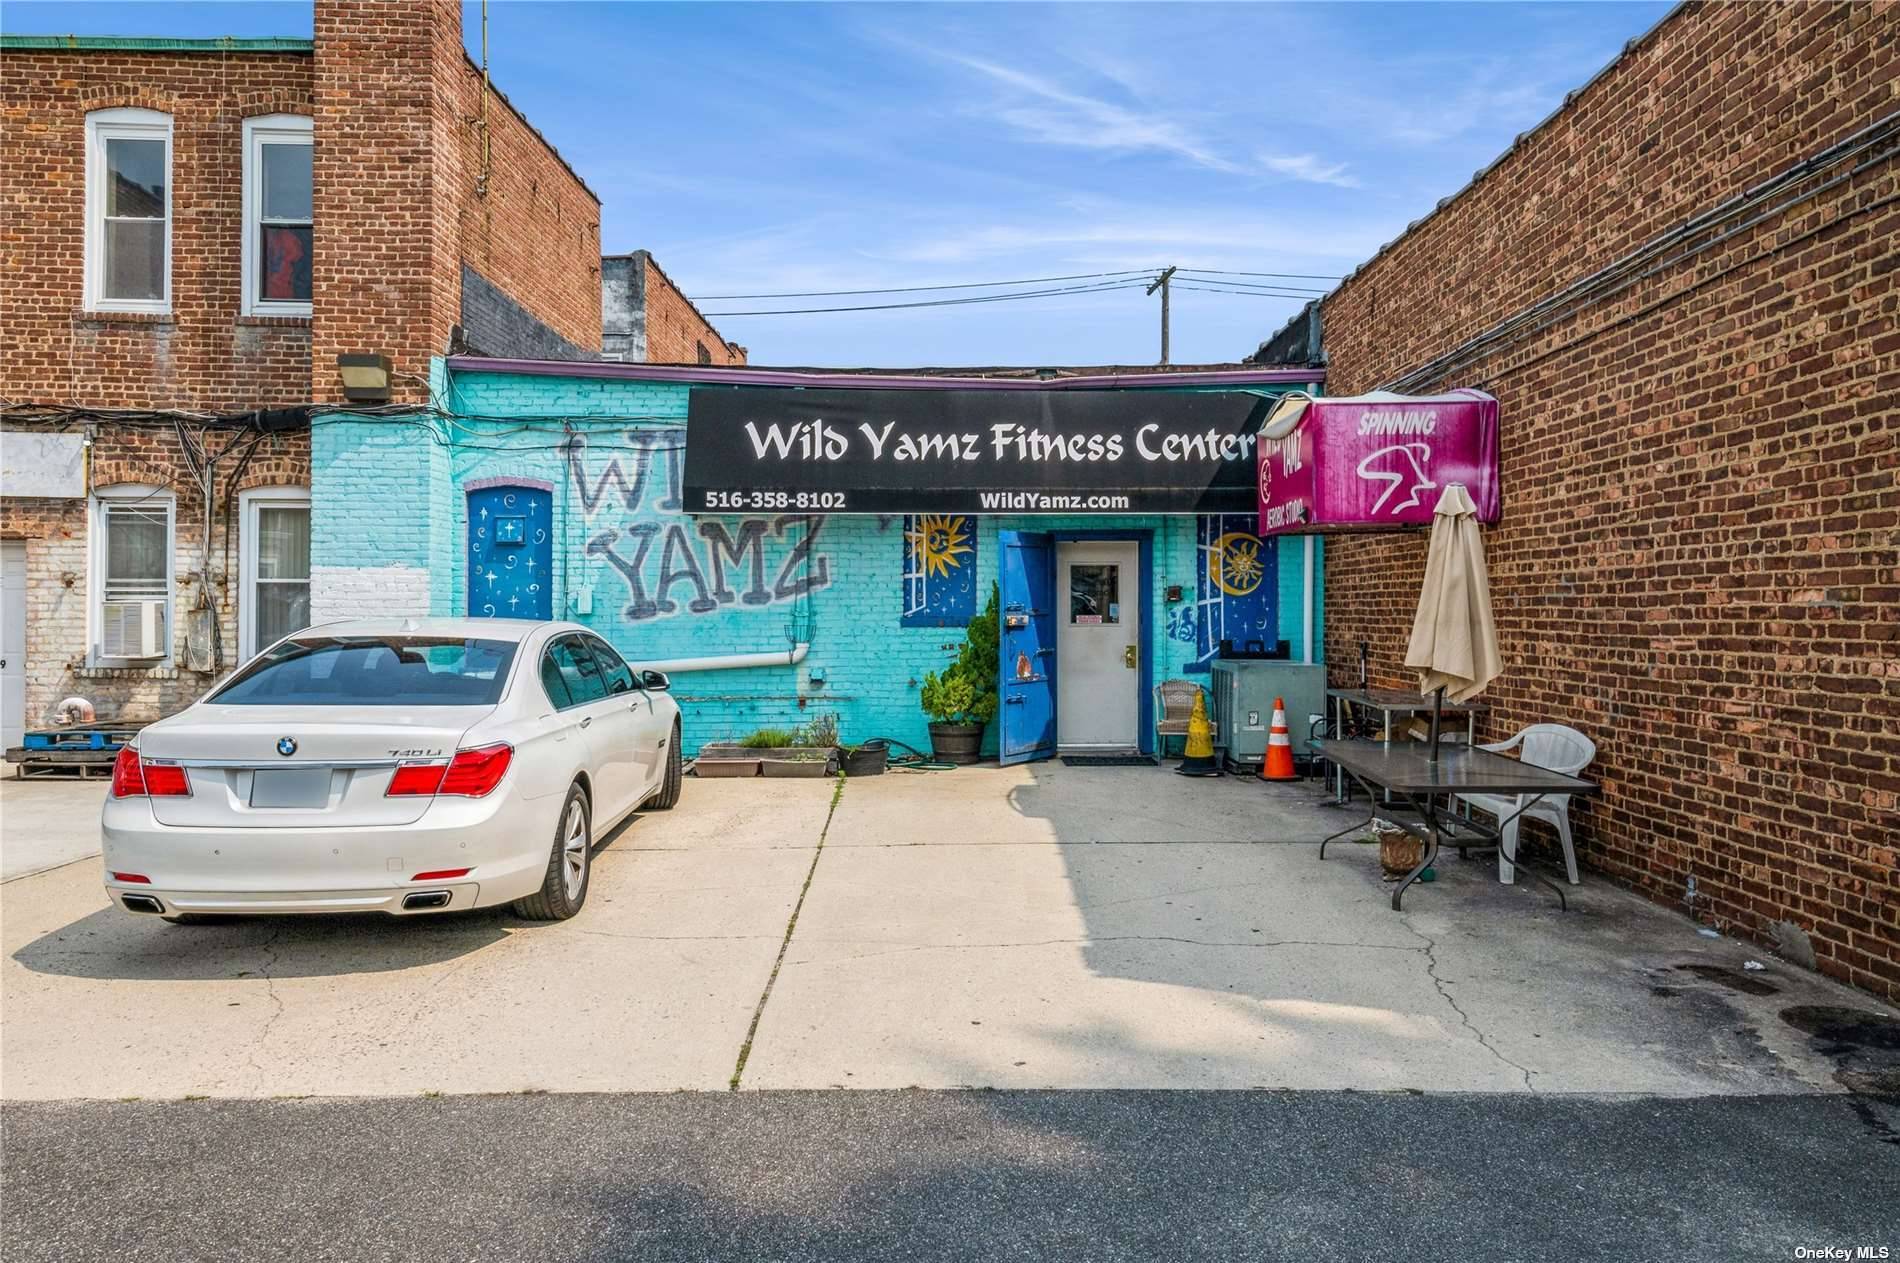 Welcome to this exceptional commercial property prominently situated on the bustling Hempstead Turnpike, nestled in the vibrant community of Franklin Square, offering an incredible opportunity for your business.